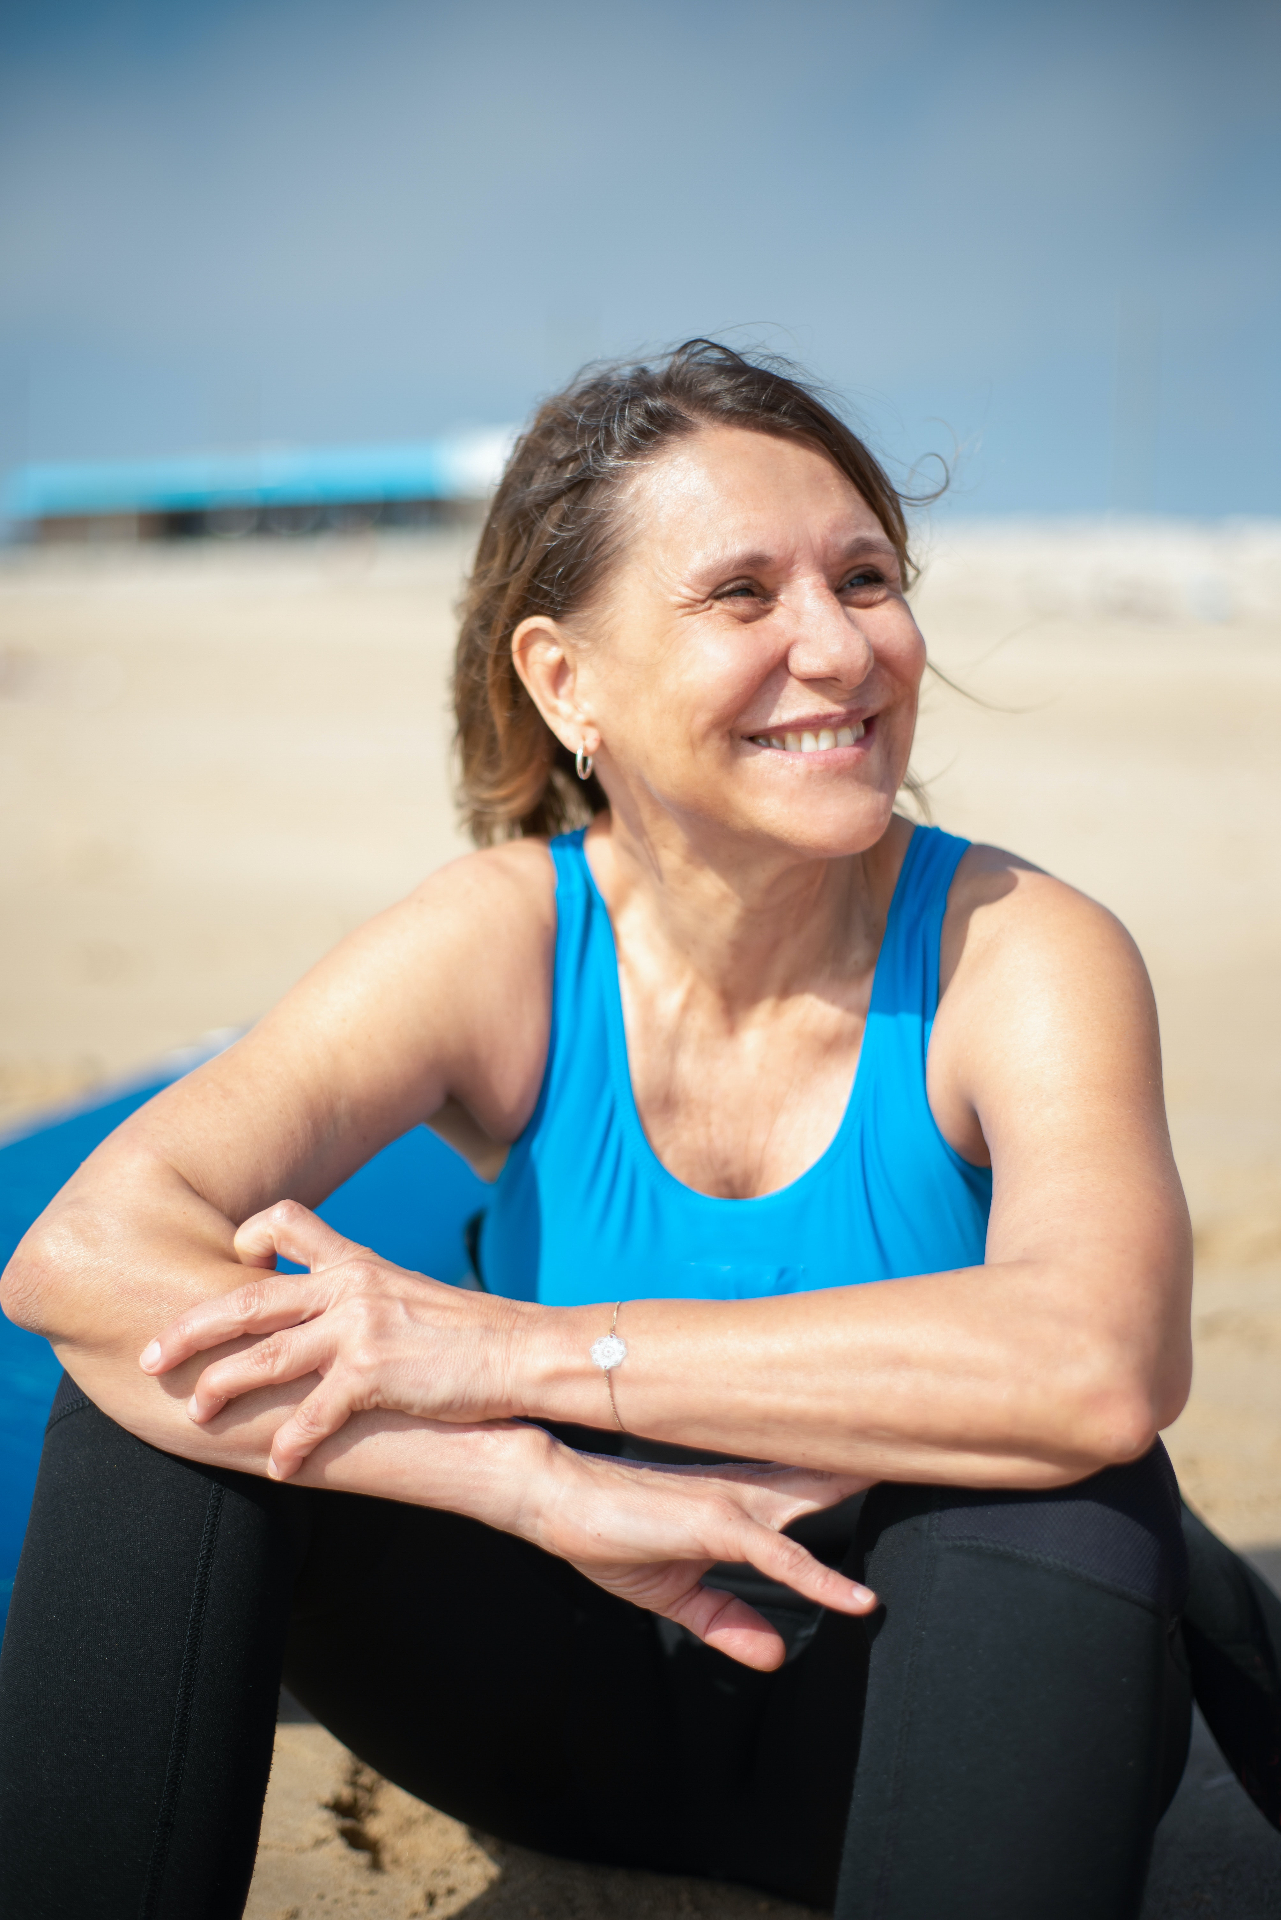 Image of an older woman in athletic wear sitting on a sandy beach smiling. Begin assessing your cognitive strengths with the help of adult neuropsychological testing in Saint Petersburg, FL.